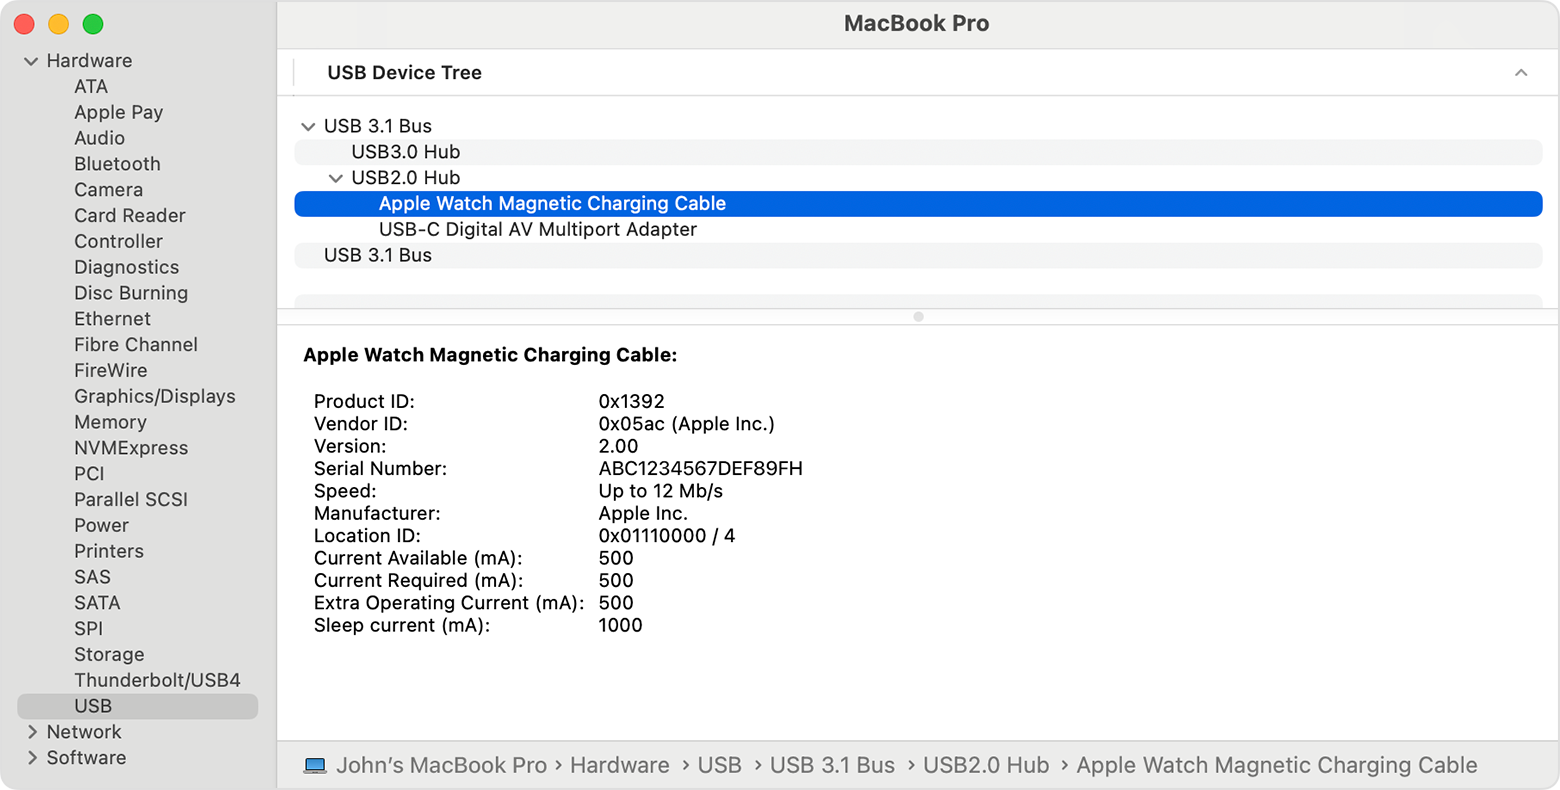 MacBook Pro System Report showing manufacturer details of Apple Watch Magnetic Charging Cable